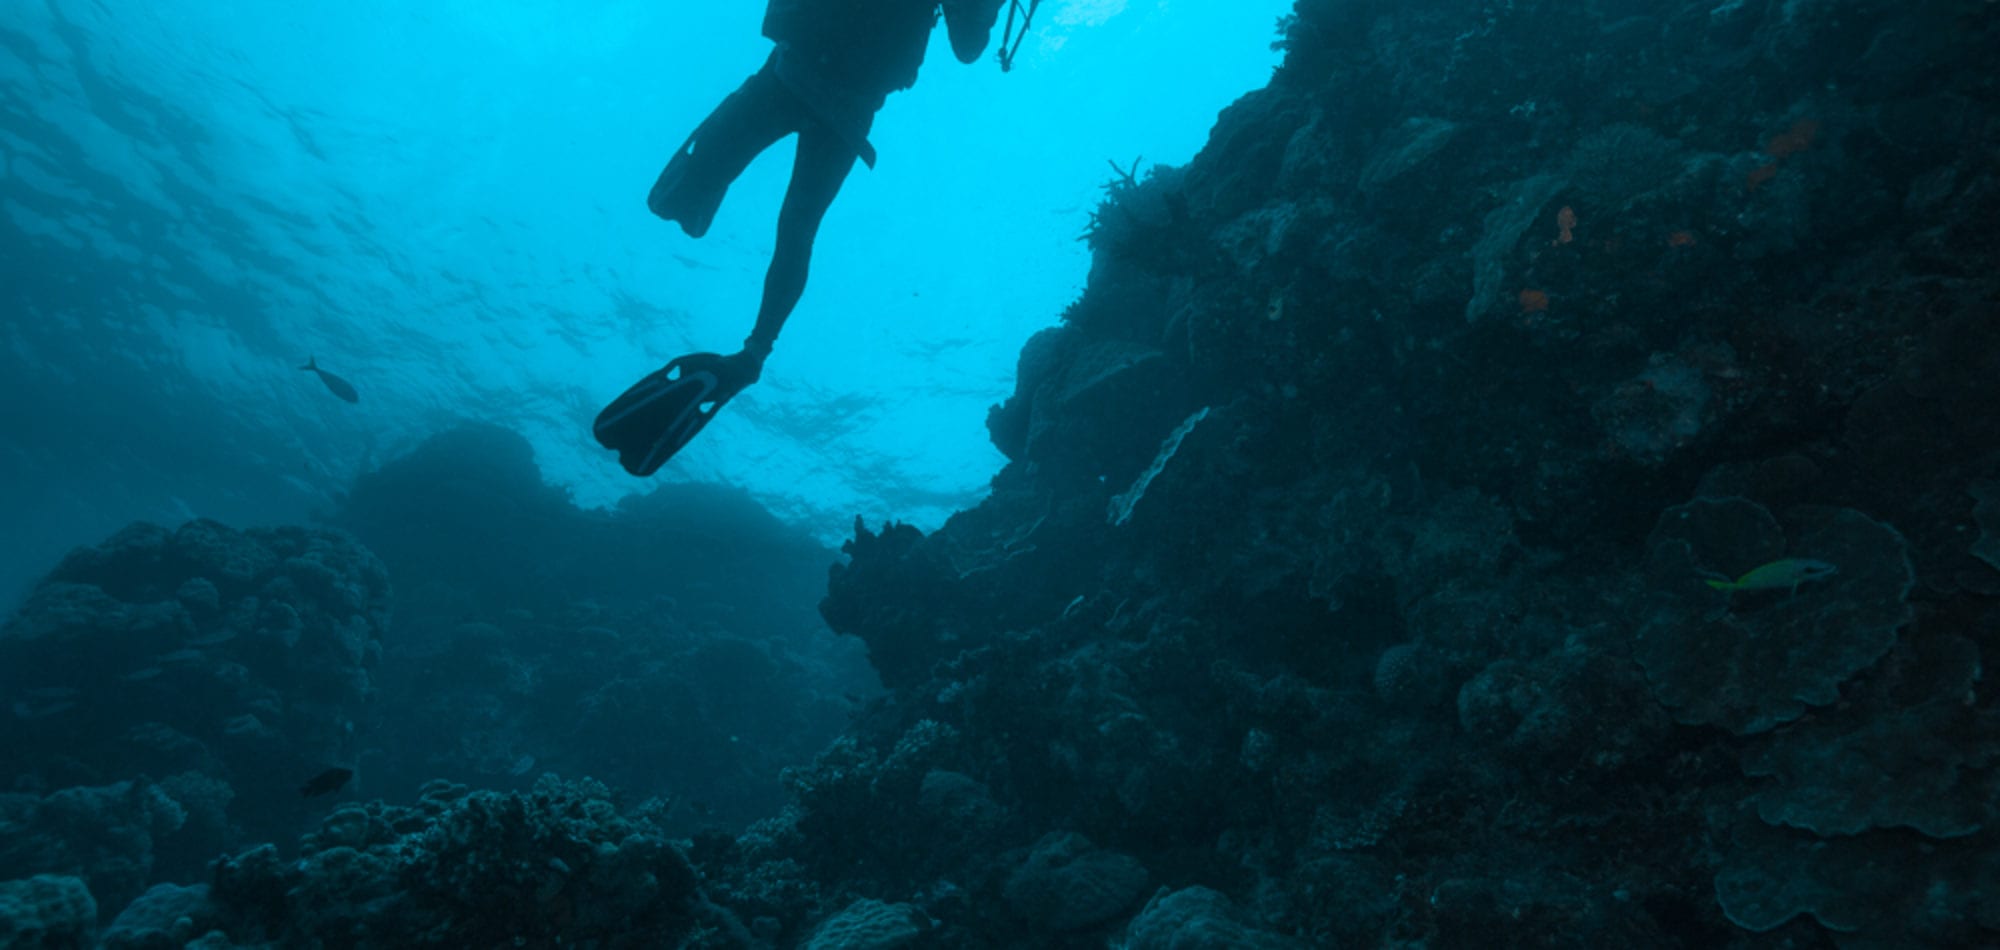 Diver on the Great Barrier Reef